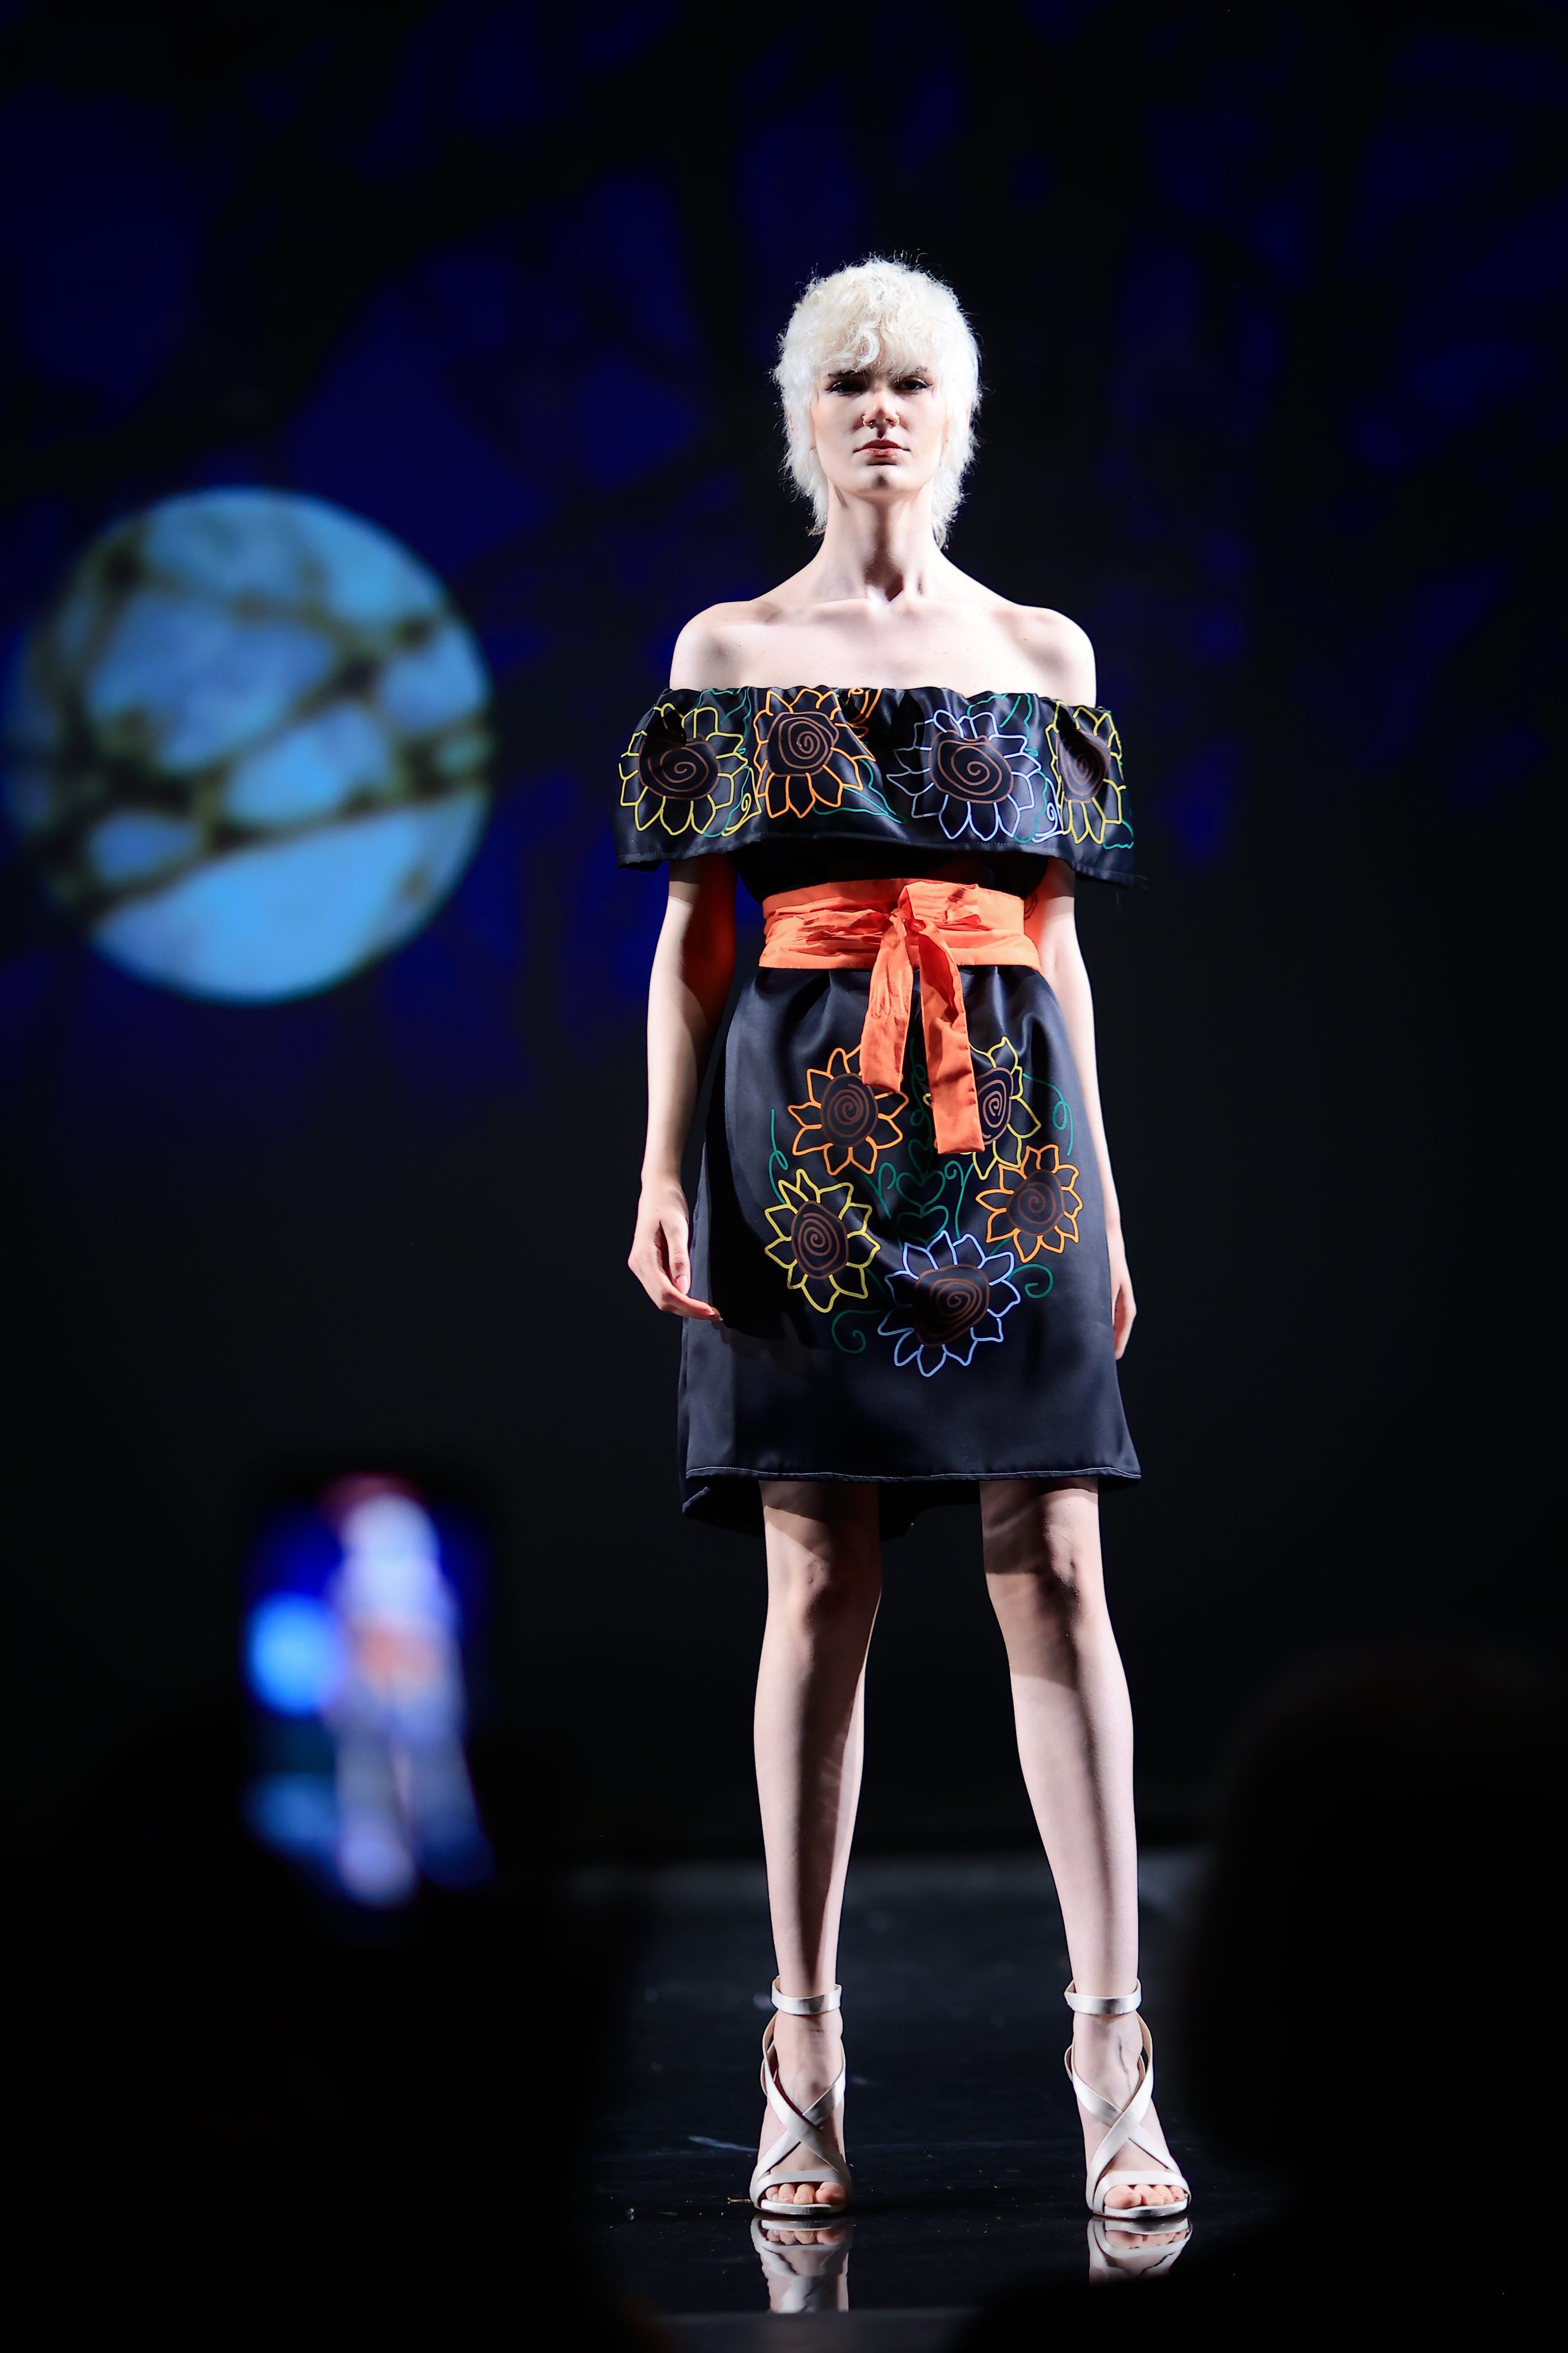 Model wearing silver strapped heels and a black dress with colorful floral pattern and an orange belt